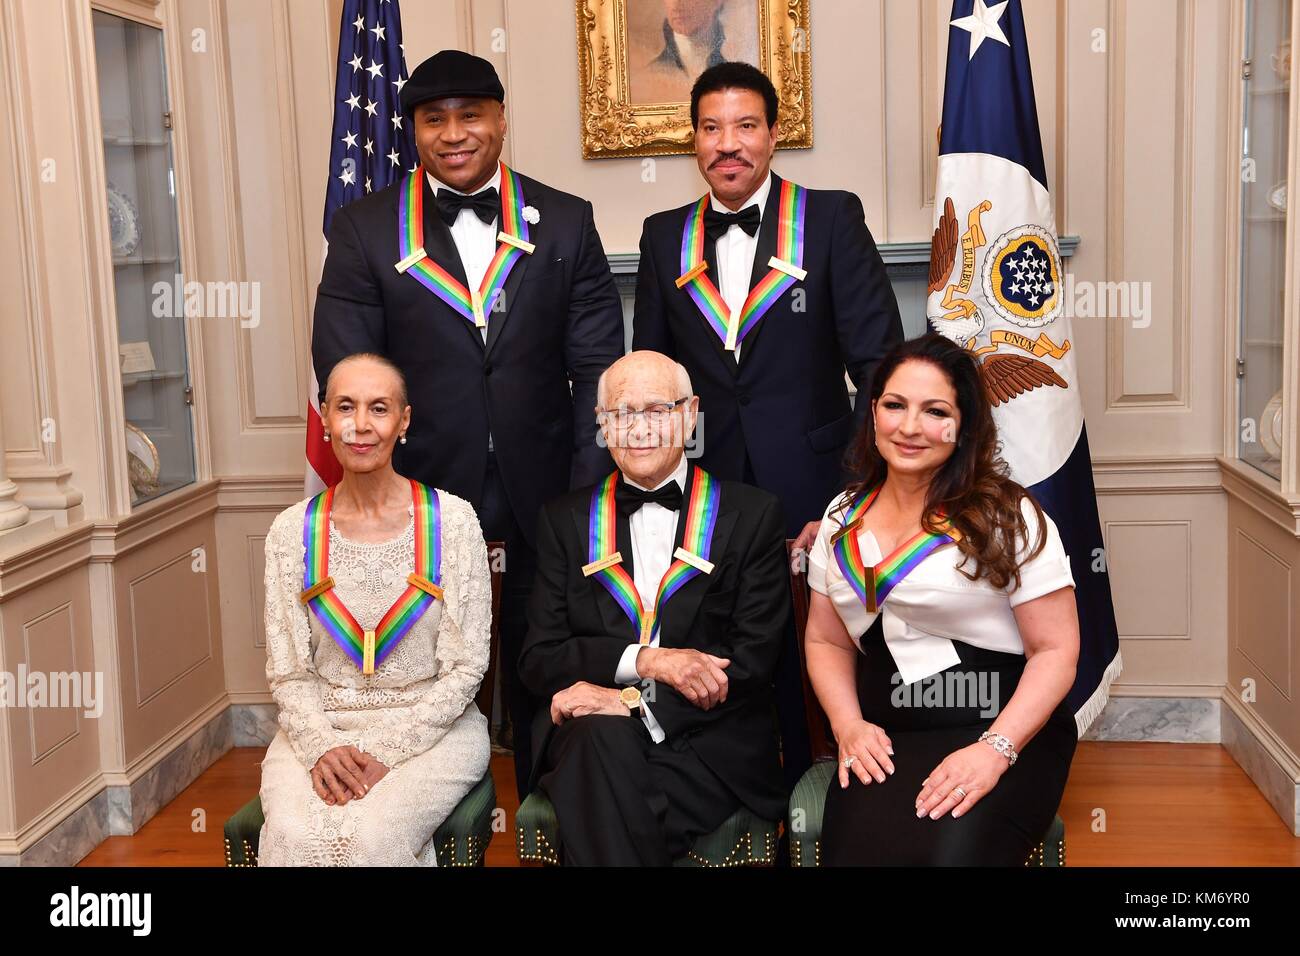 The 2017 Kennedy Center Honor Award recipients pose for a group photo following the gala dinner at the Department of State December 2, 2017 in Washington, DC. First row left to right are: Carmen de Lavallade, Norman Lear and Gloria Estefan, second row: LL Cool J and Lionel Ritchie. Stock Photo